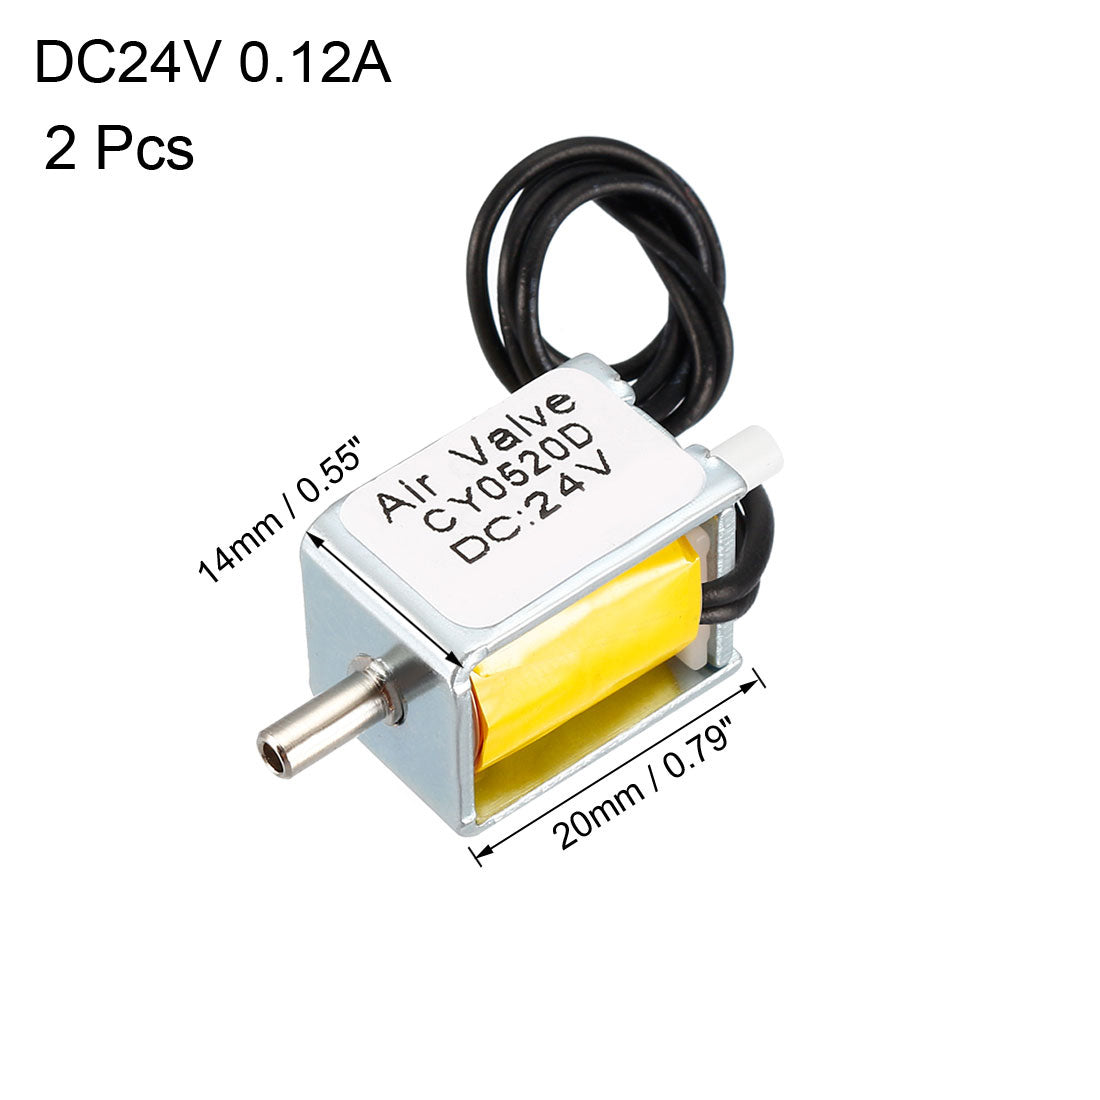 uxcell Uxcell Miniature Solenoid Valve 2 Way Normally Closed DC24V 0.12A Air Solenoid Valve, 2pcs